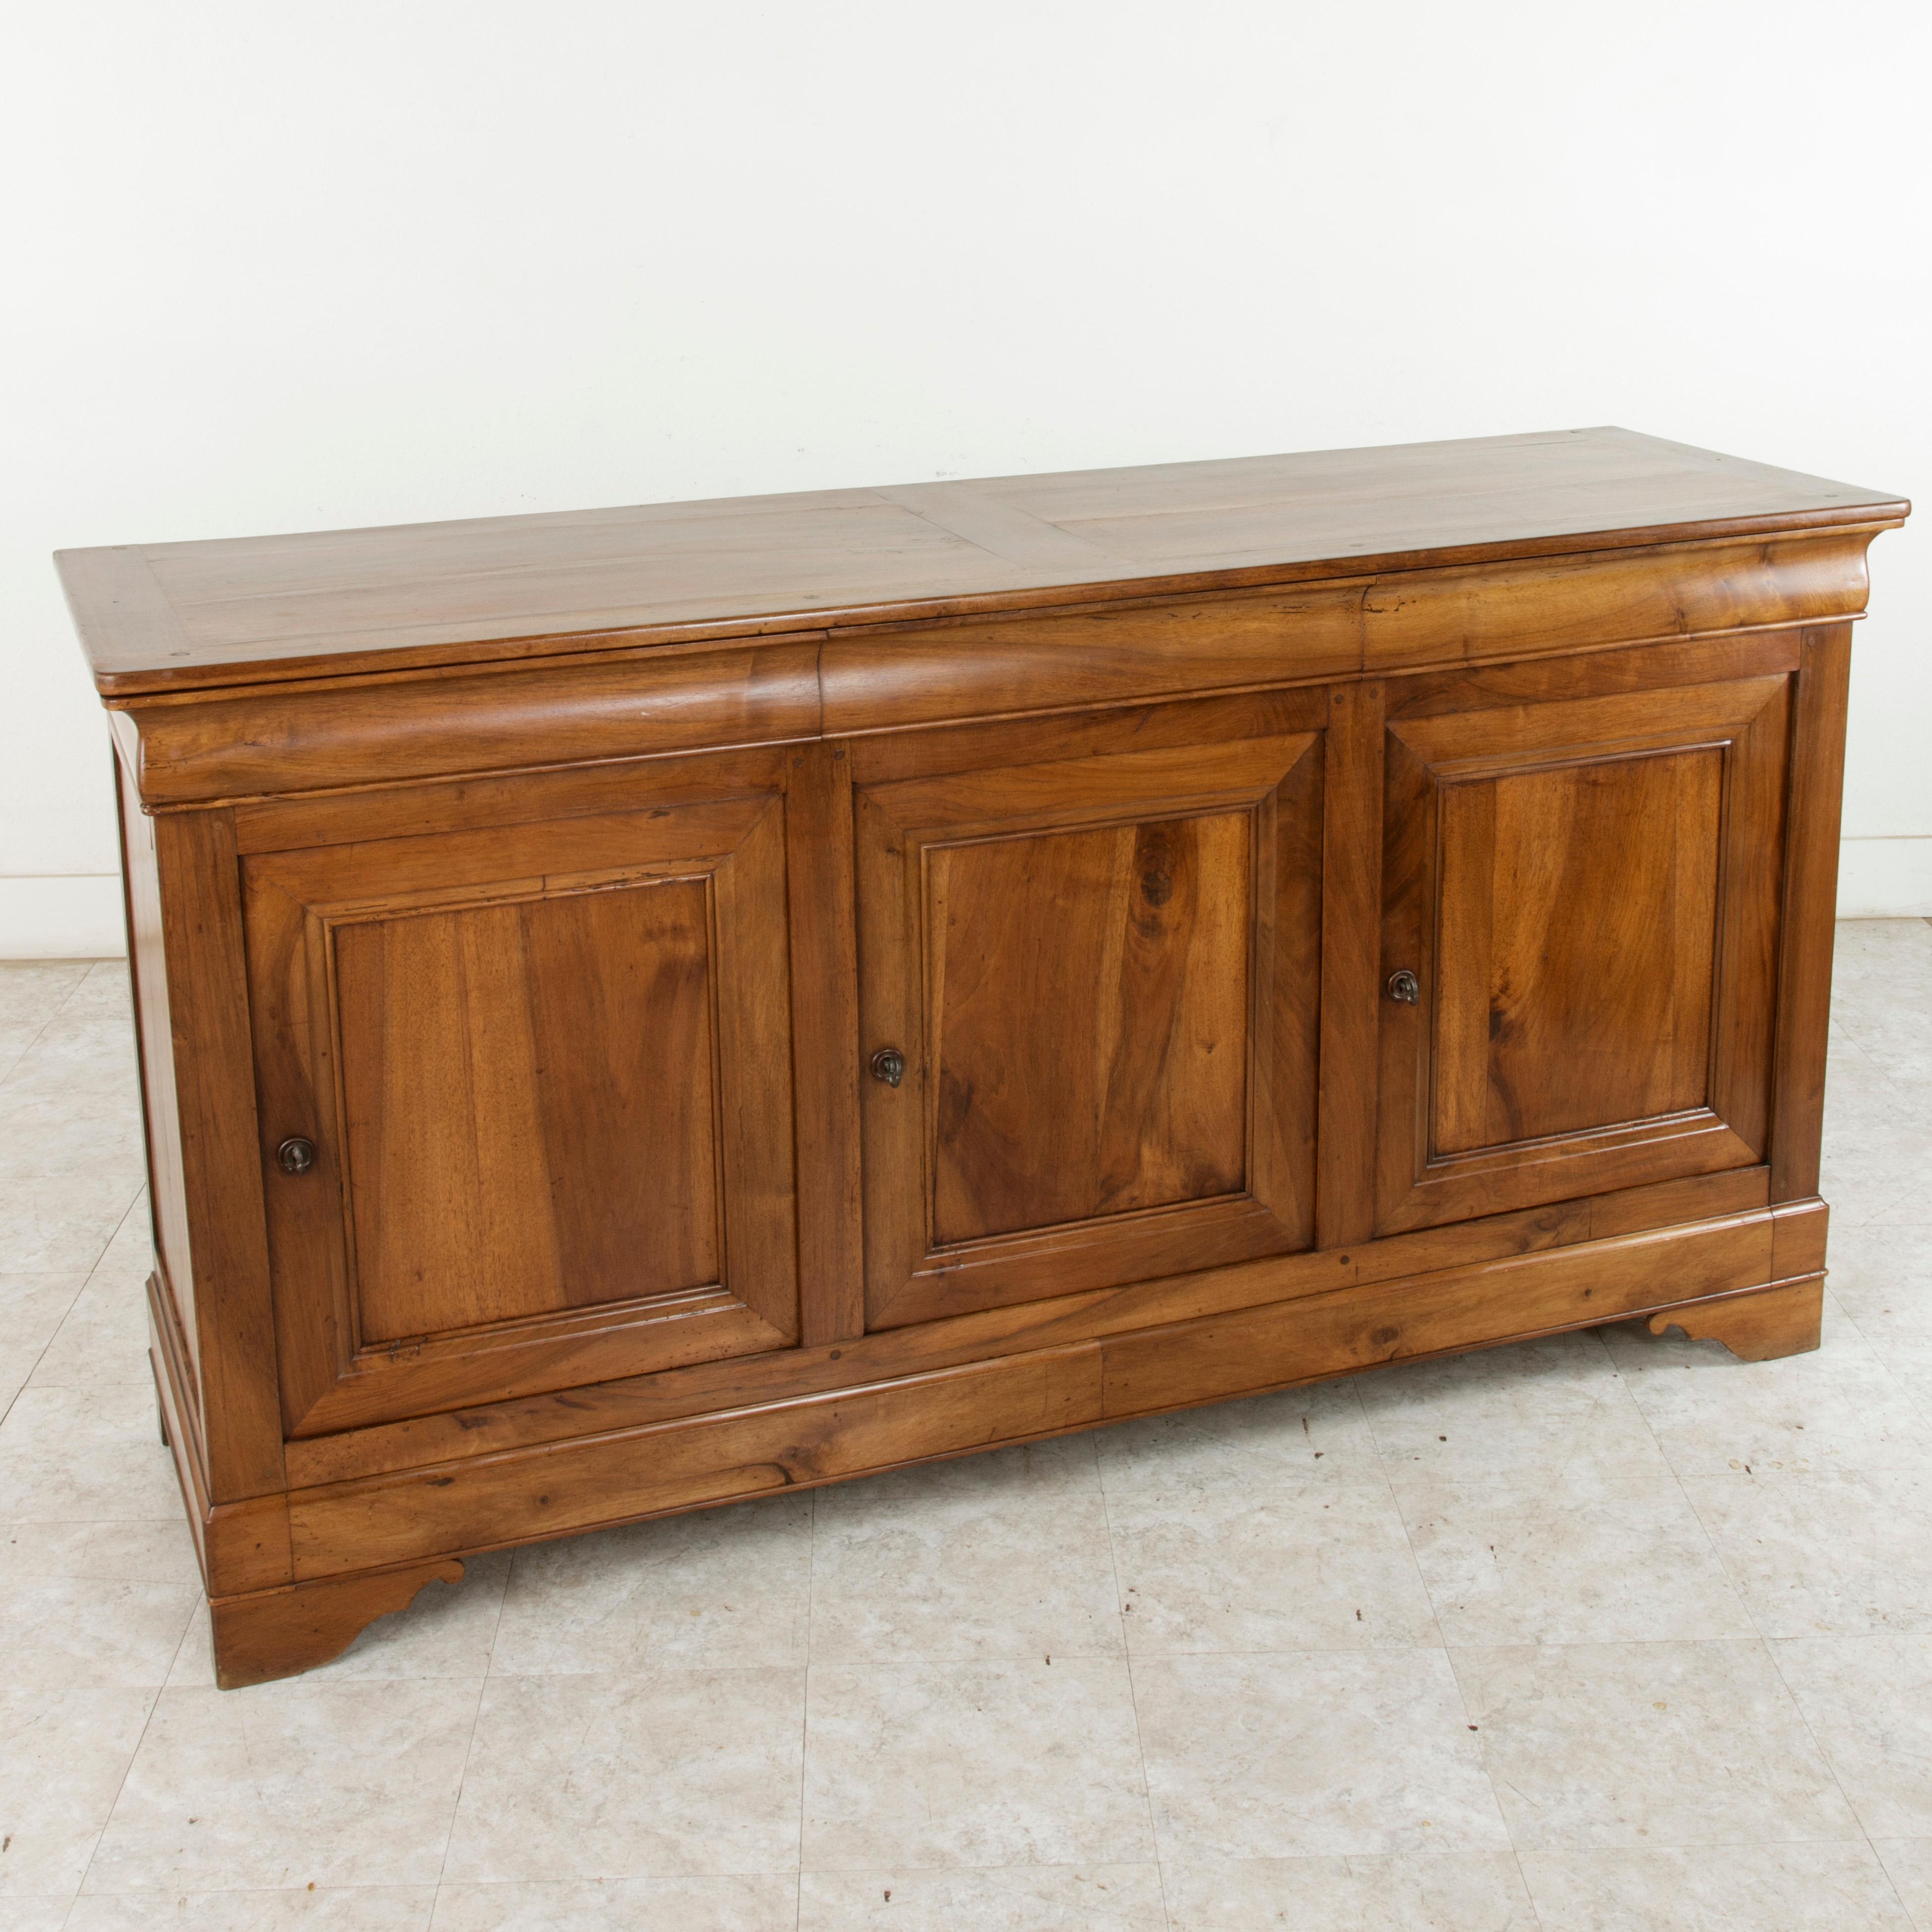 This French Louis Philippe style enfilade or sideboard from the turn of the twentieth century is constructed of solid hand walnut with hand pegged joinery. This server features three drawers that fit seamlessly into the apron below the top. Below